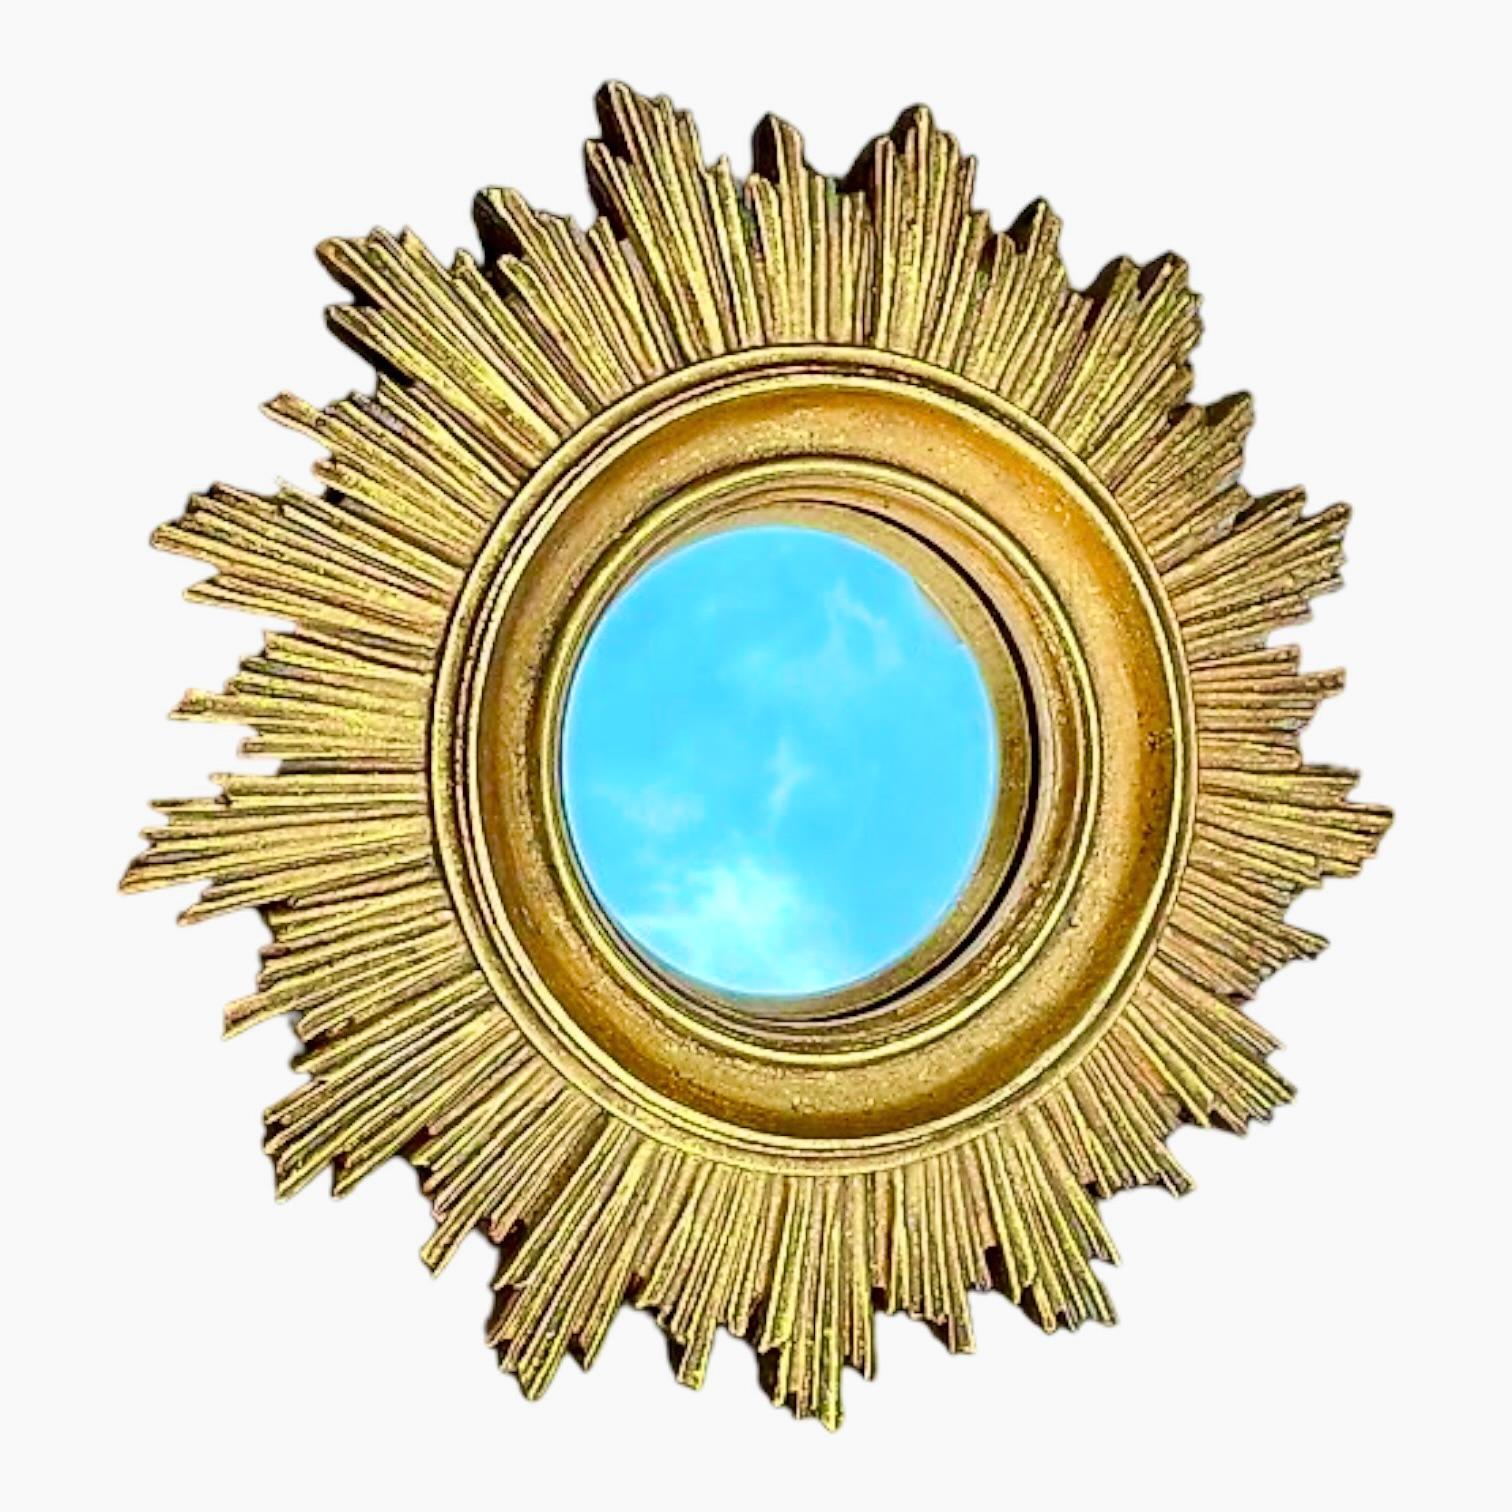 A cute sunburst or starburst mirror. Made of gilded composition. It measures approximate: 7